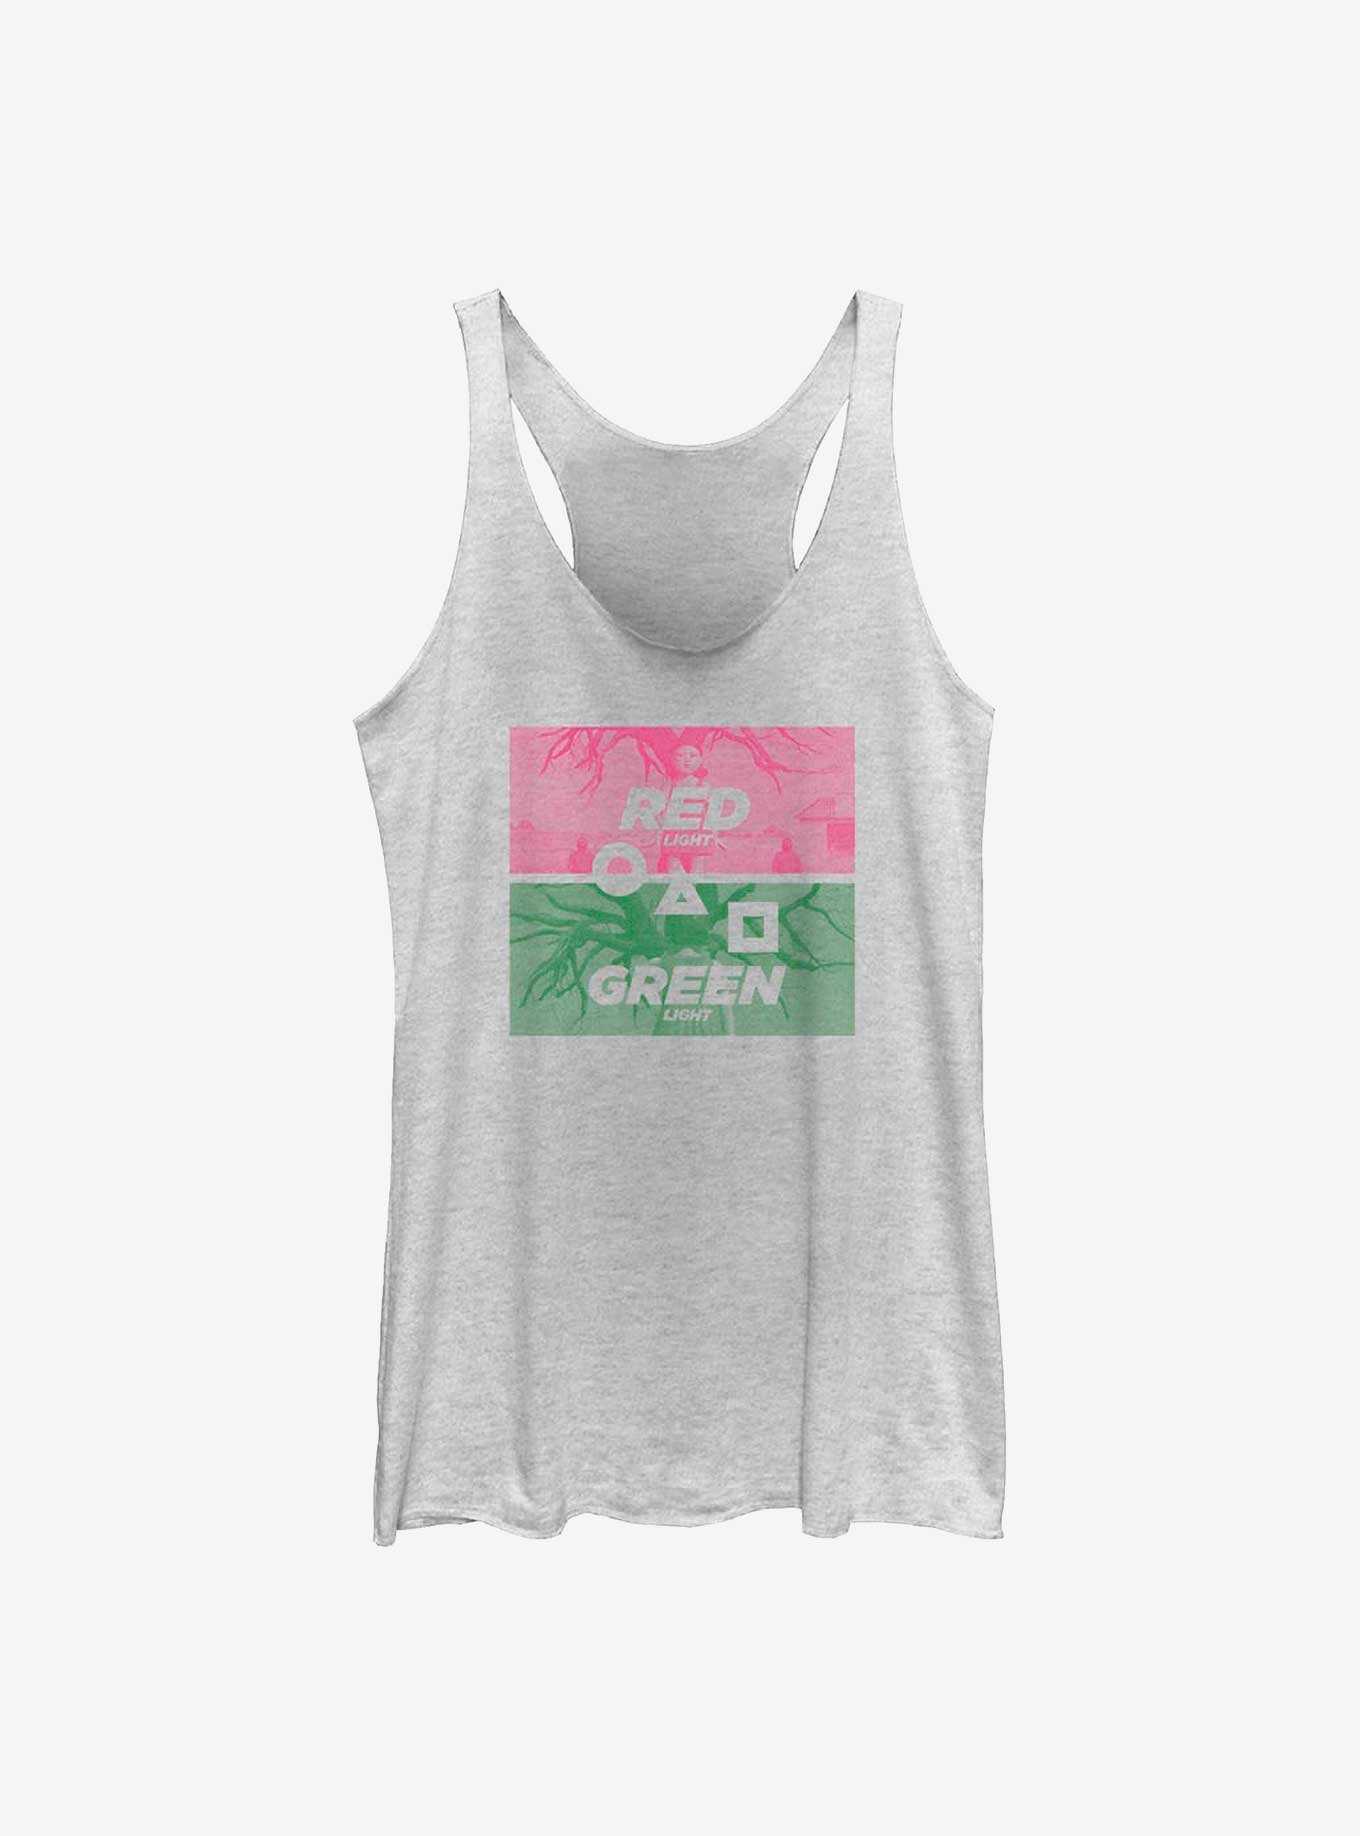 Squid Game First Game Womens Tank Top, , hi-res